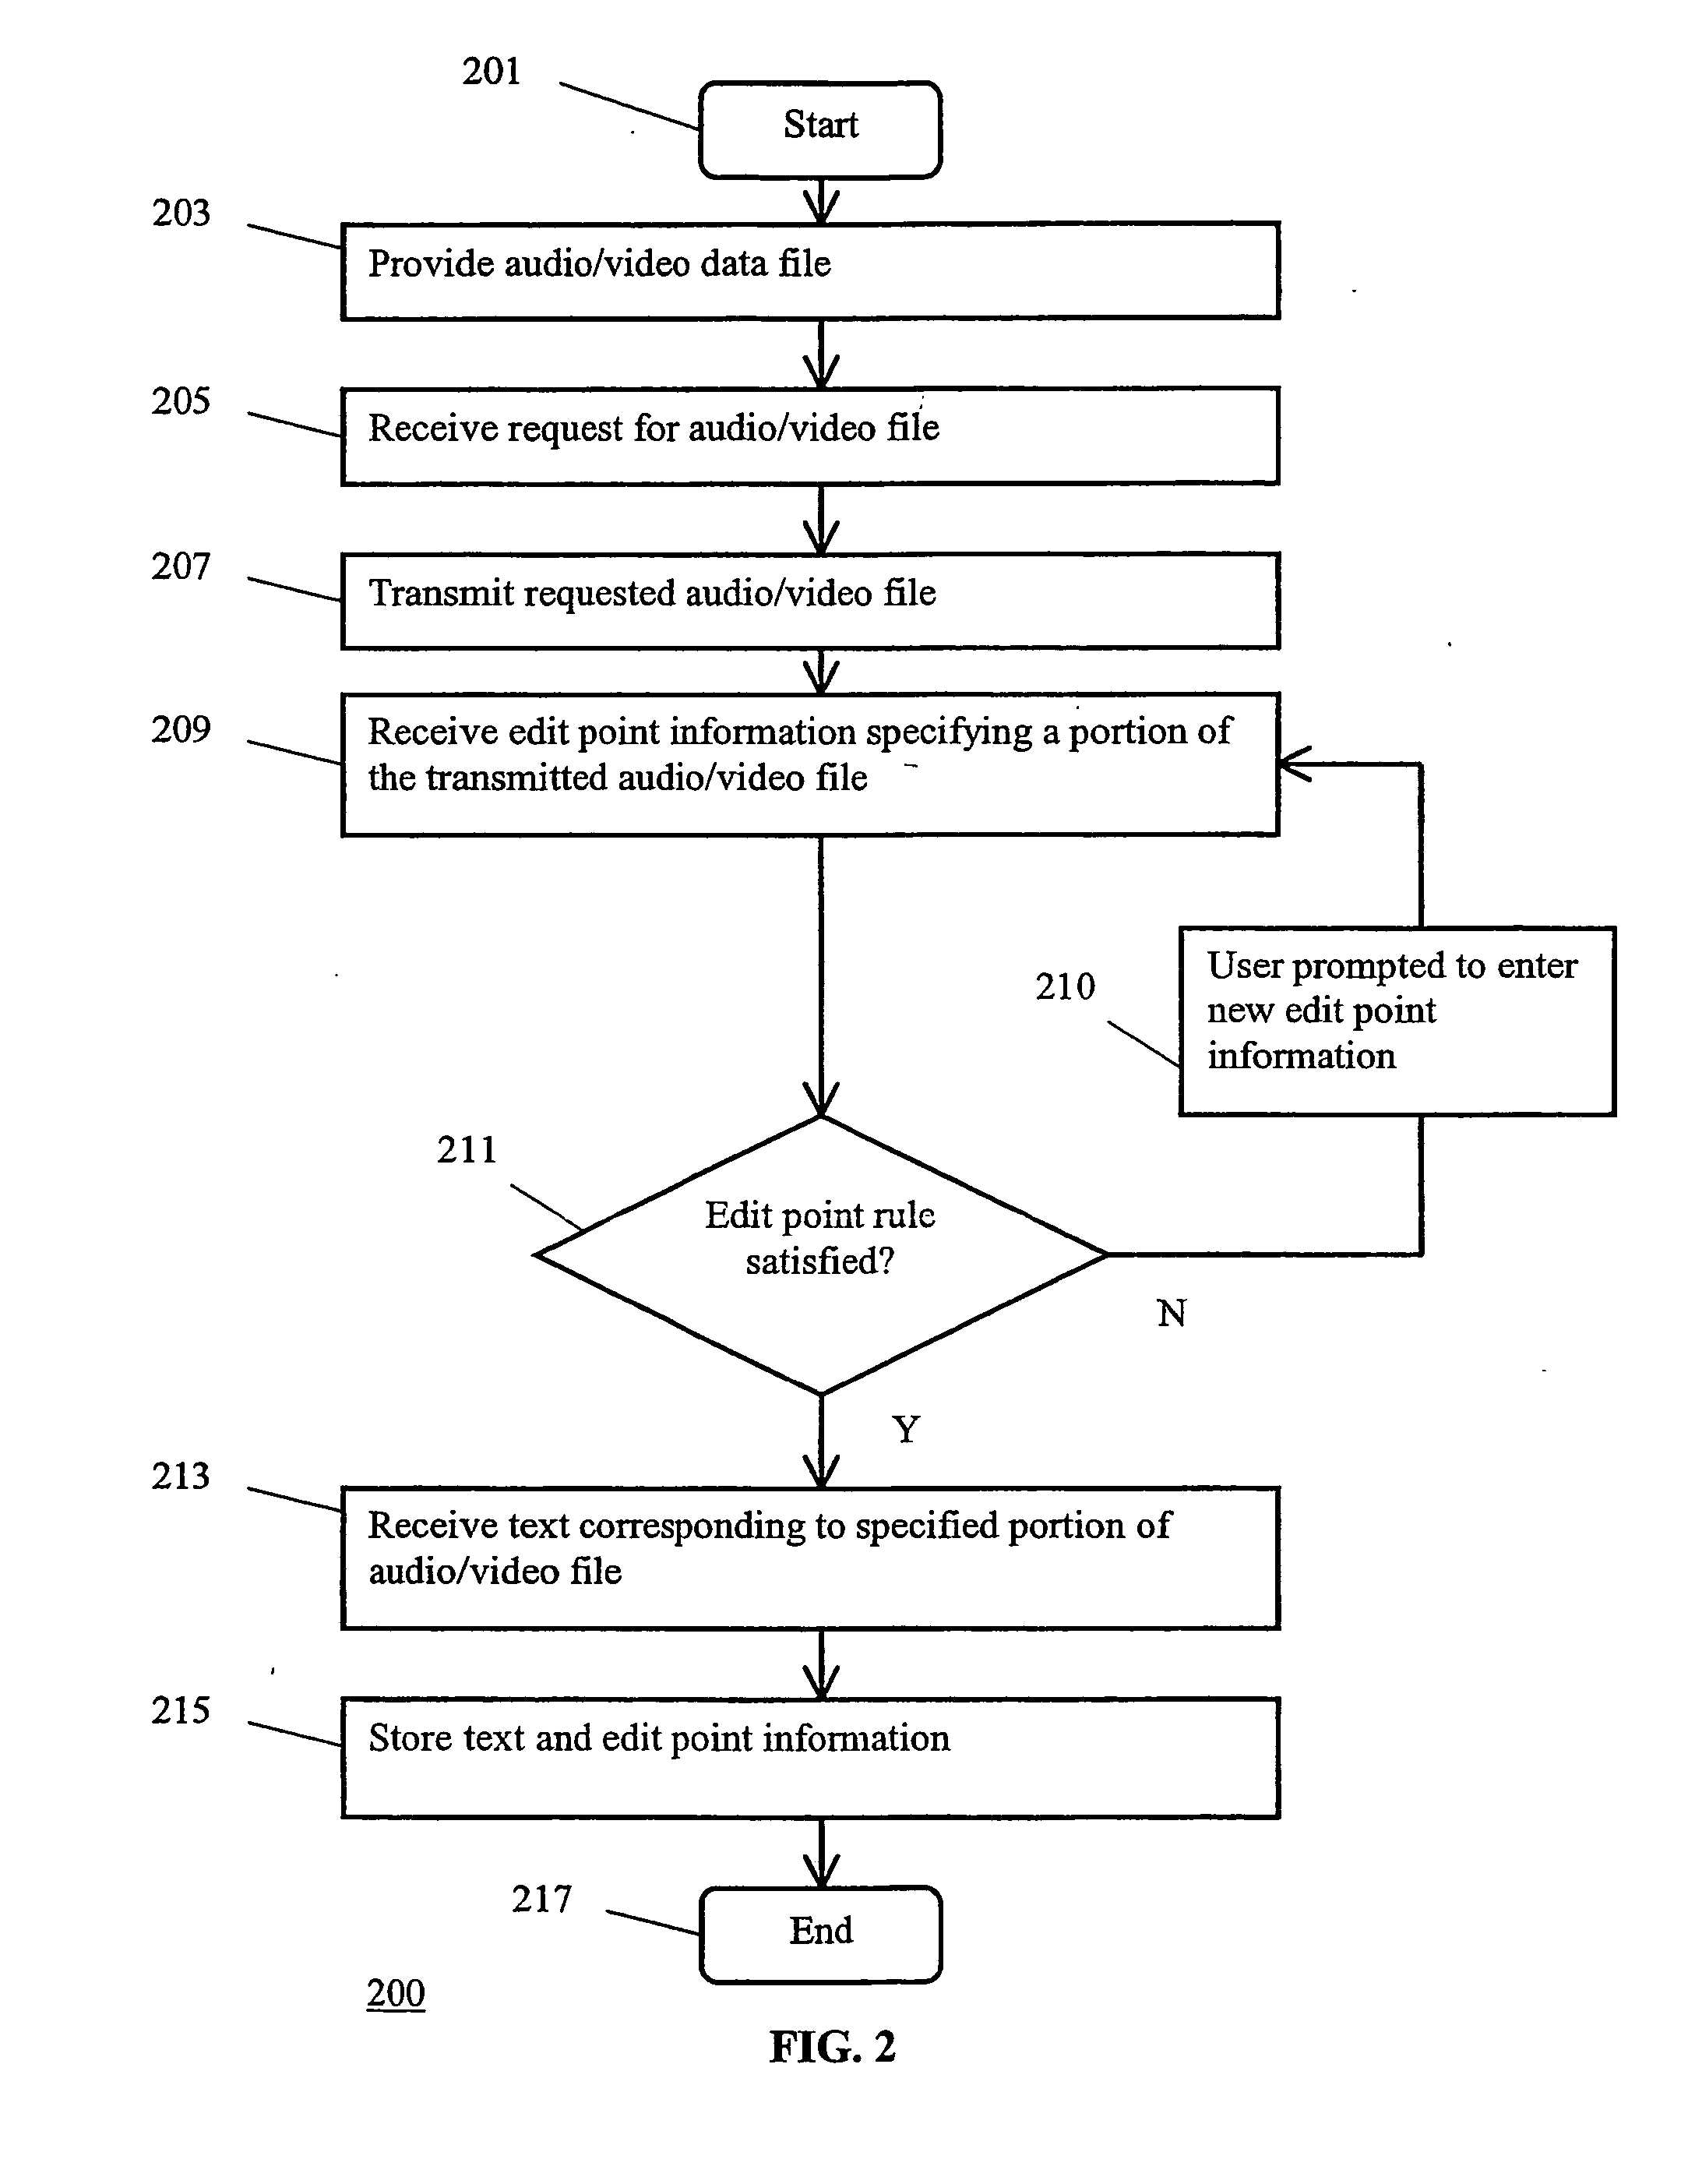 Method and system for annotating audio/video data files